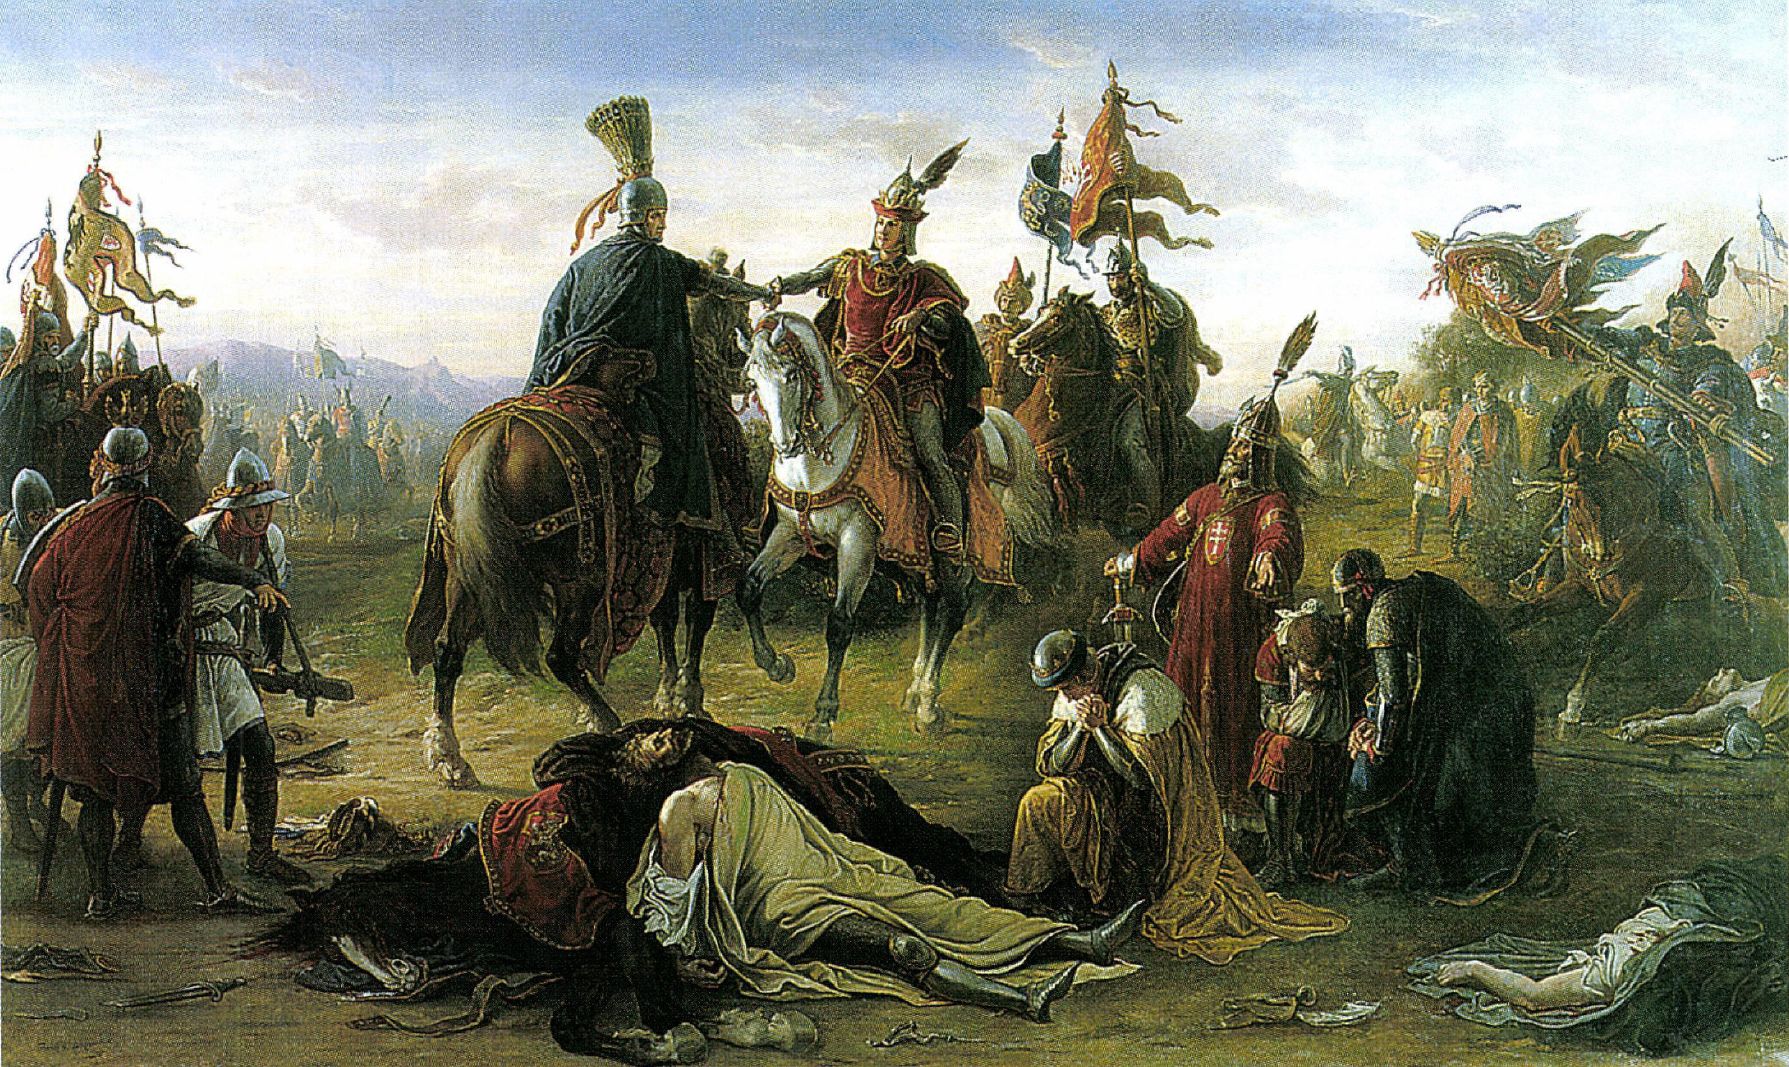 1278: The Powerful King of Bohemia Killed During the Battle on the Marchfeld